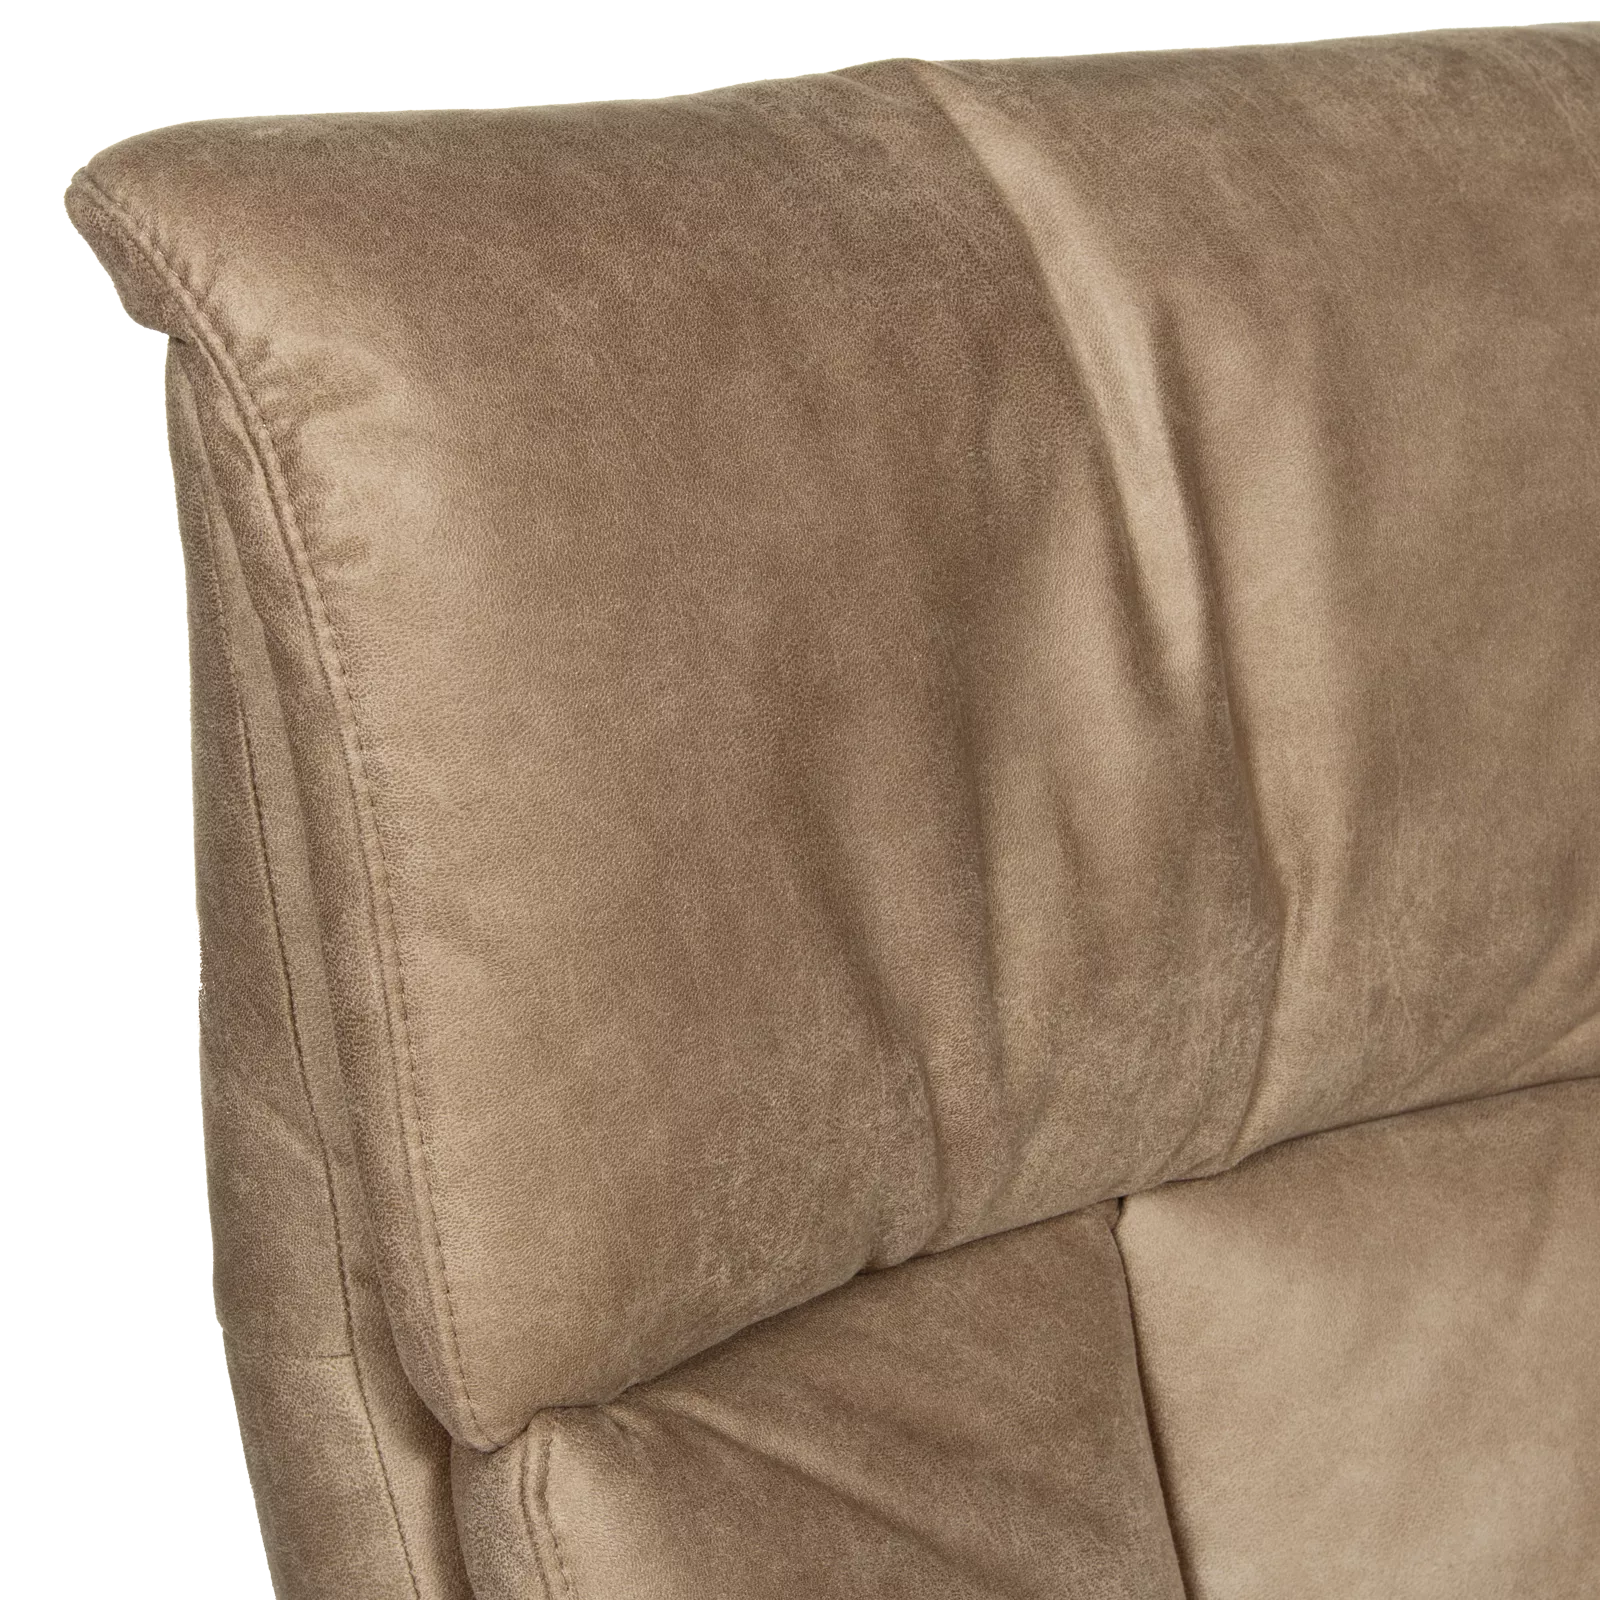 Relaxfauteuil (large - handmatig) Cuno - Tex Bull Liver